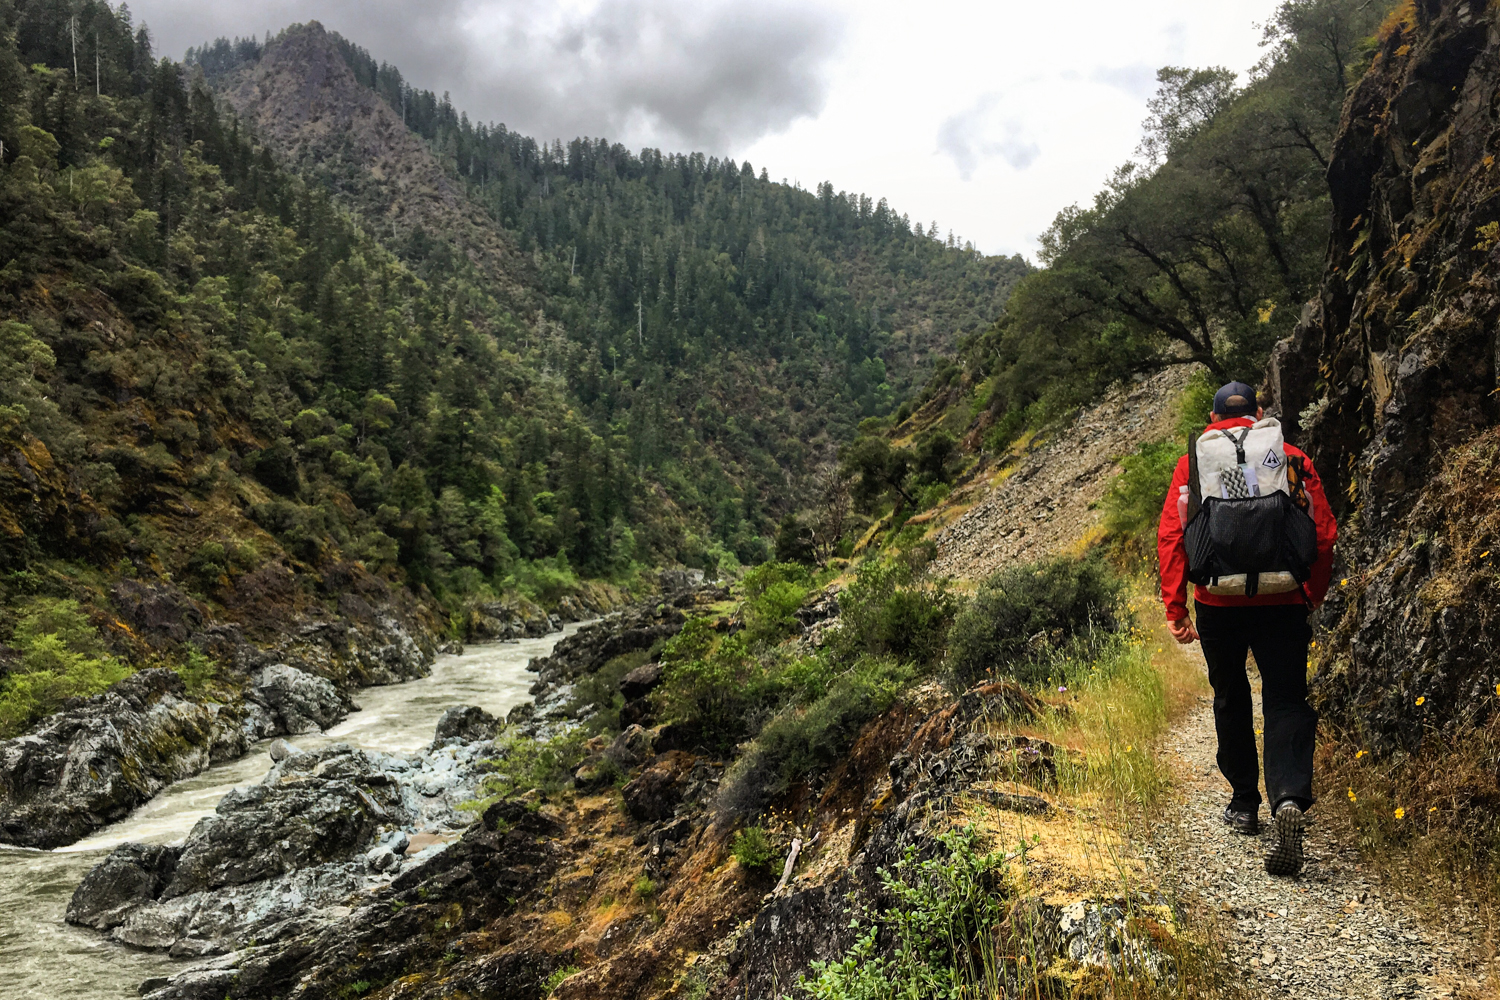 Rogue River Trail - Day 1